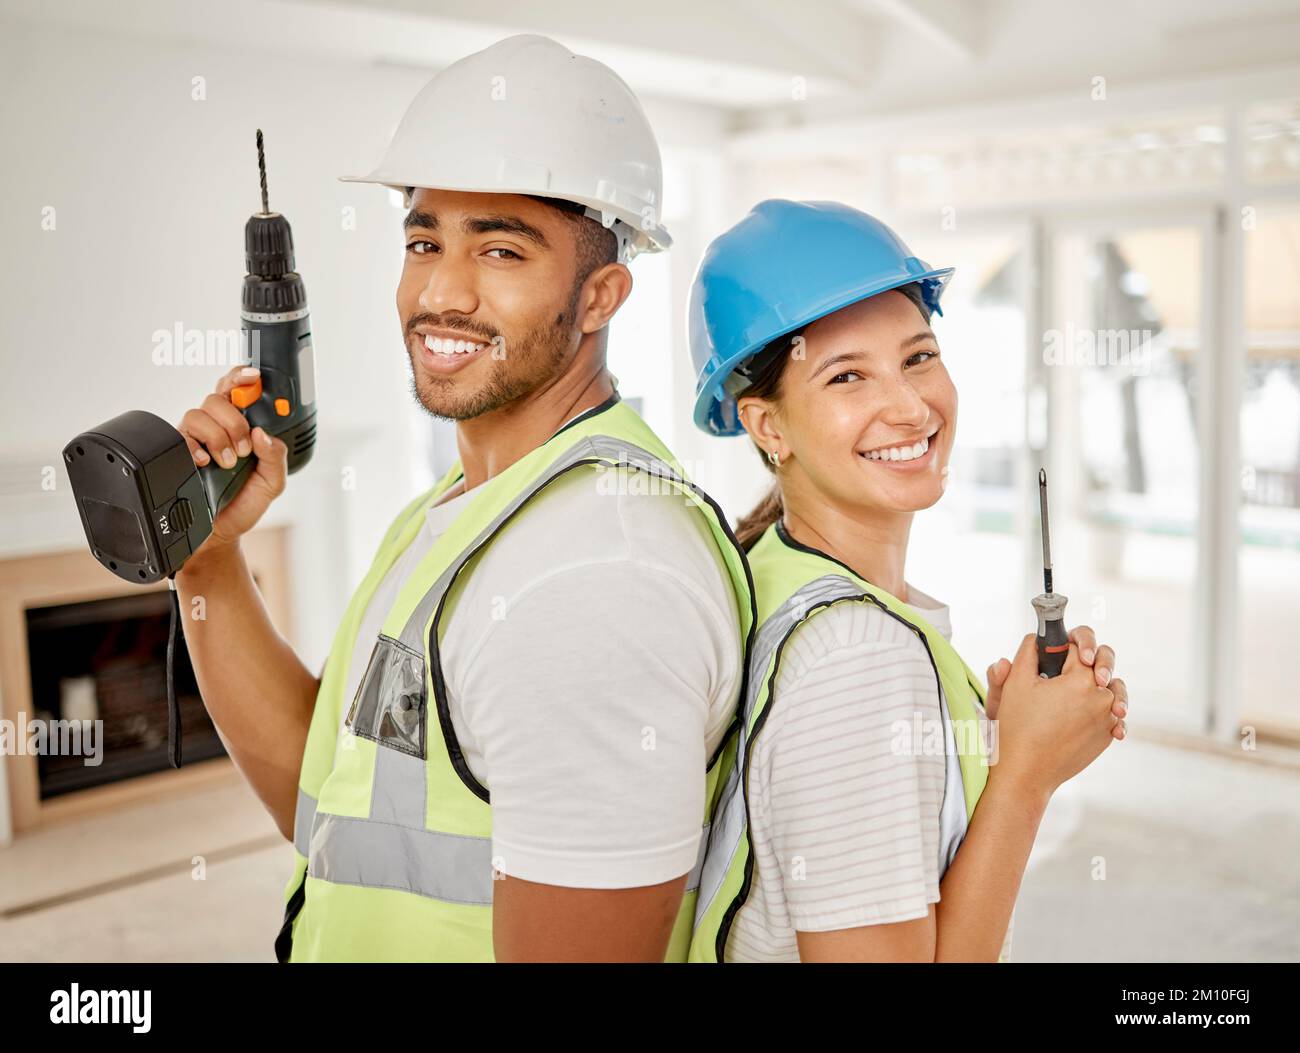 Time to make this house a home. two construction workers standing back to back in a house and holding maintenance equipment. Stock Photo